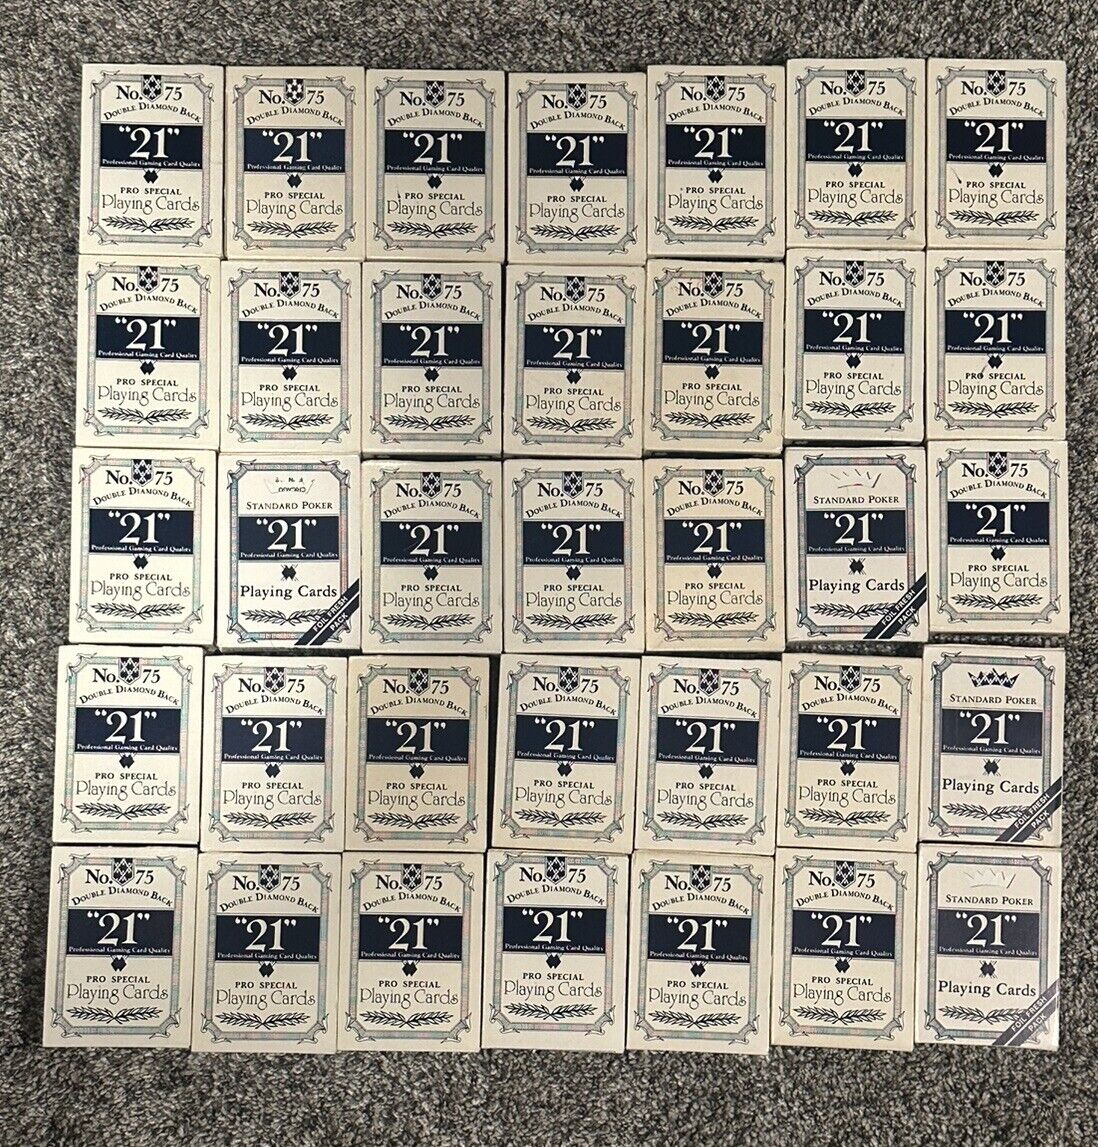 *Vintage lot of 35 Rare ‘21’ Arrco Poker Playing Cards - Great Condition*